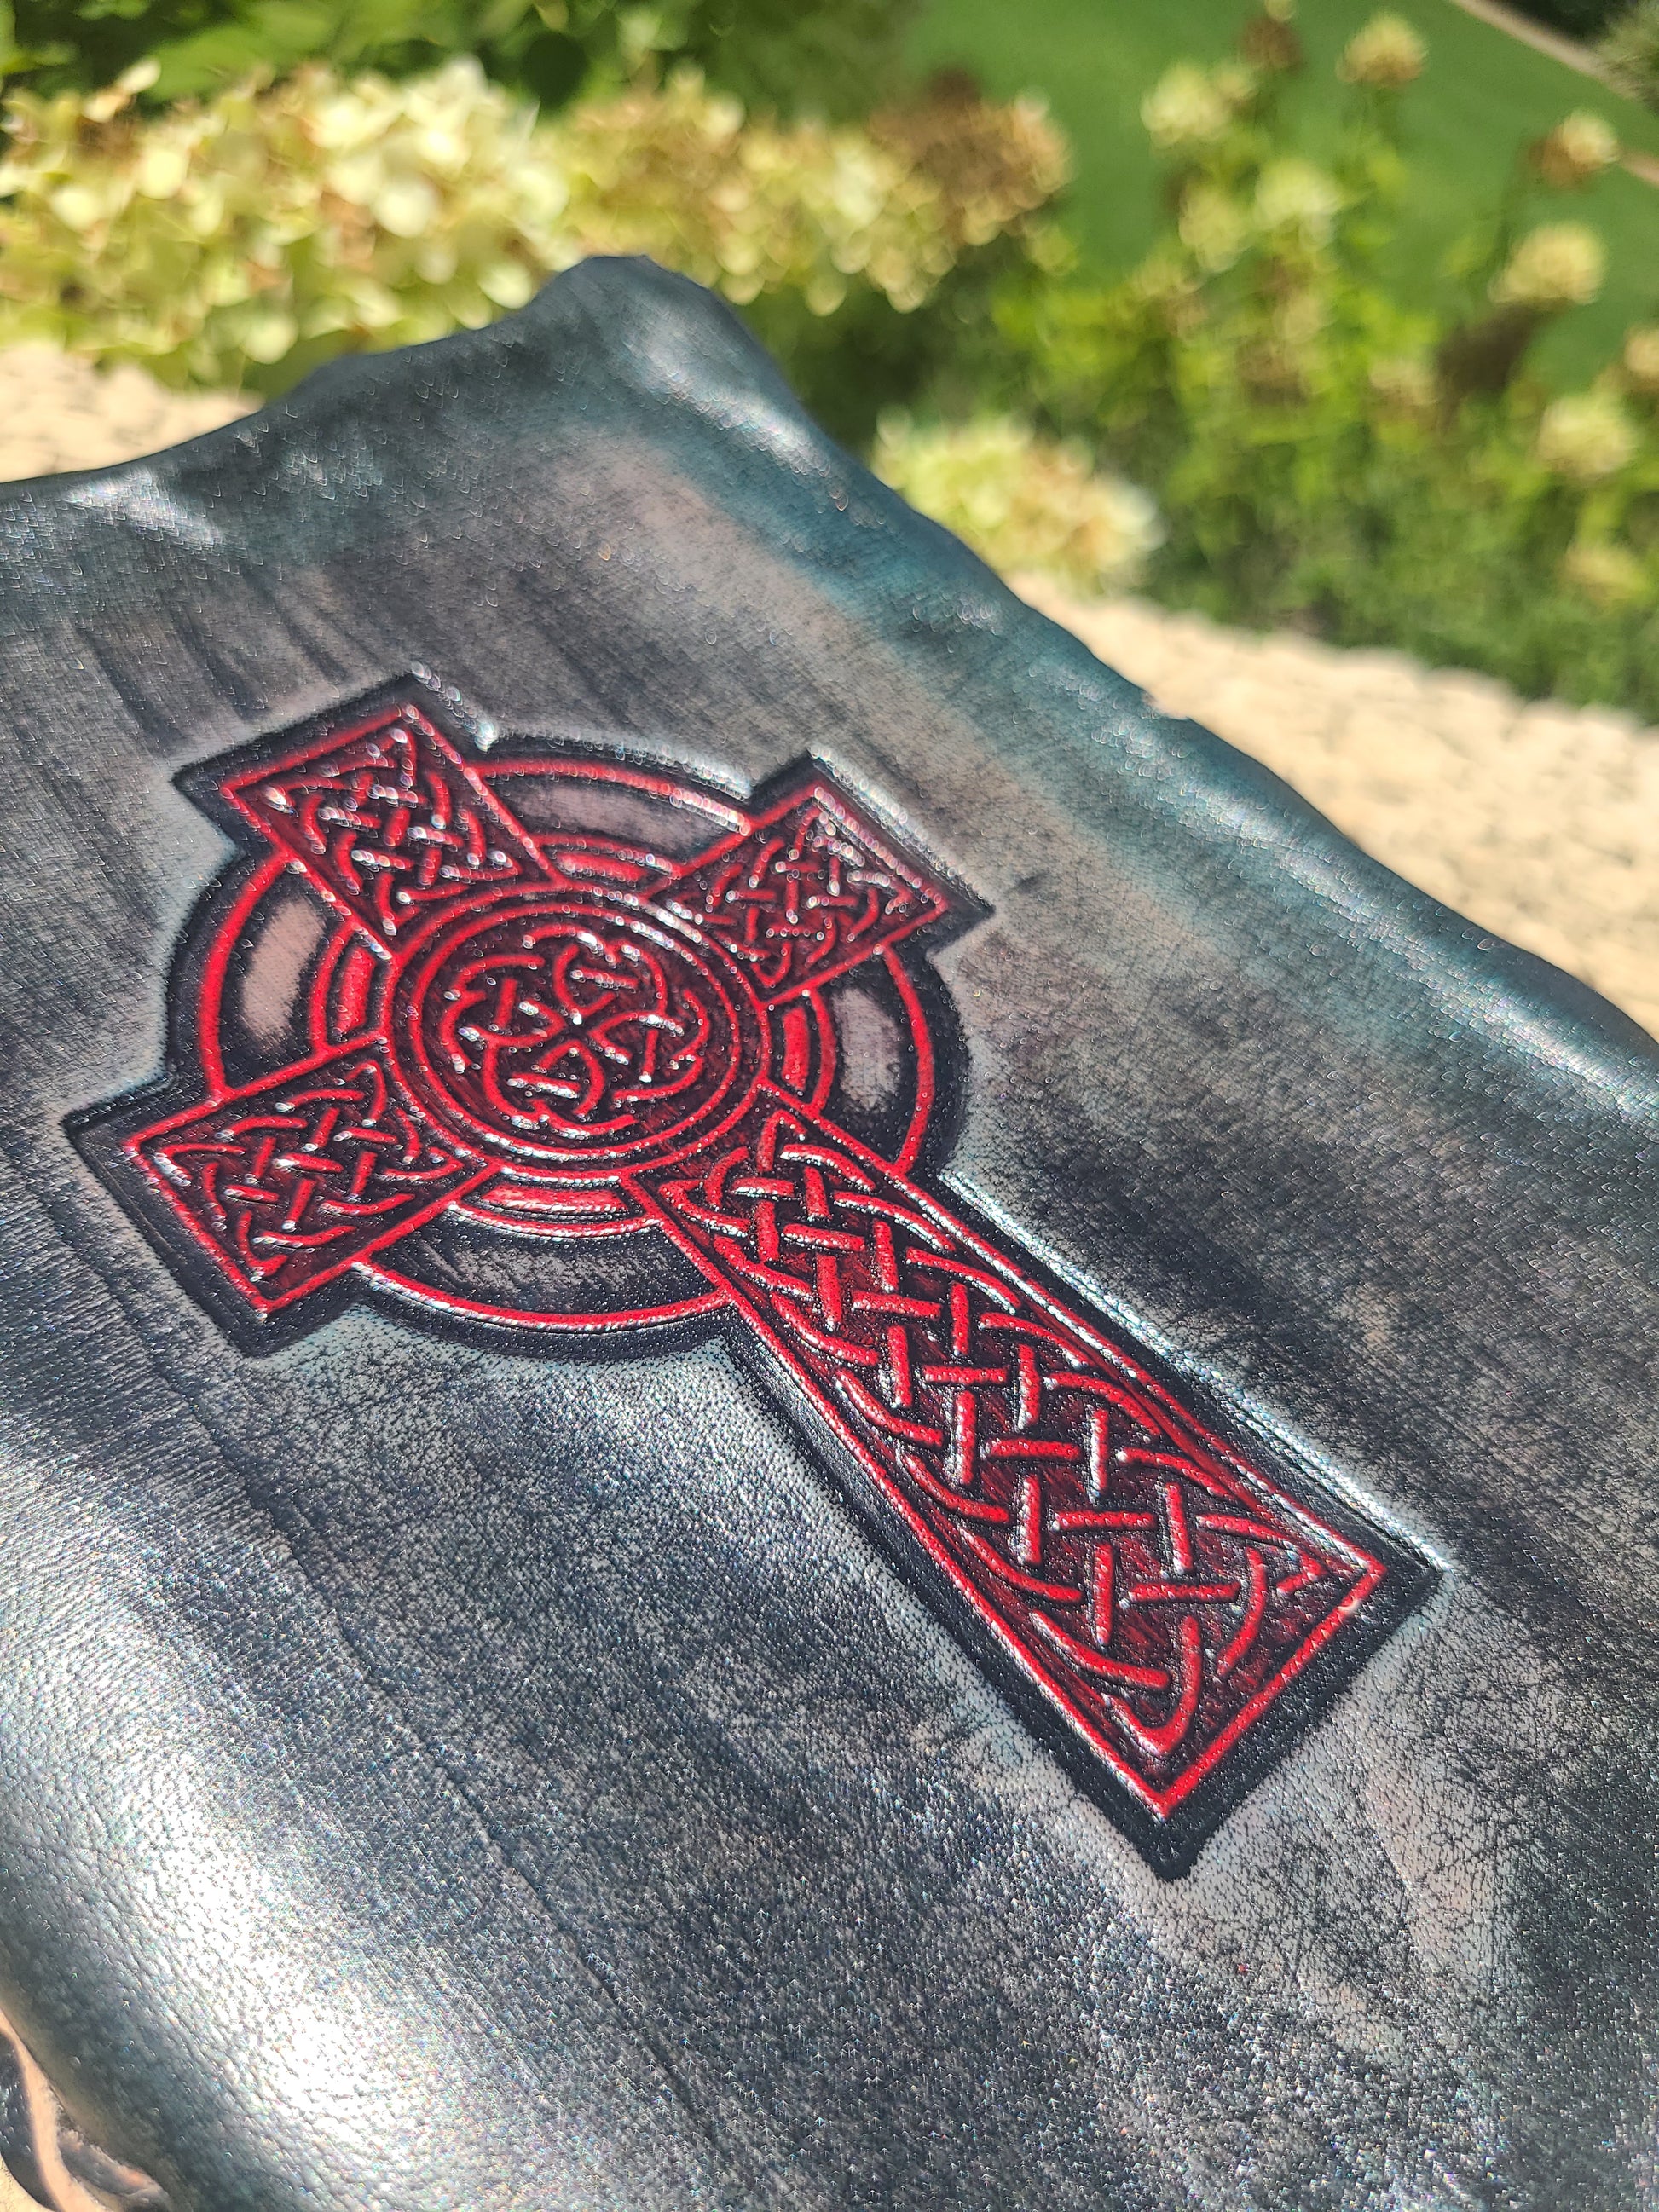 Celtic Cross Leather Writing Journal - Black and Red-Status Co. Leather Studio